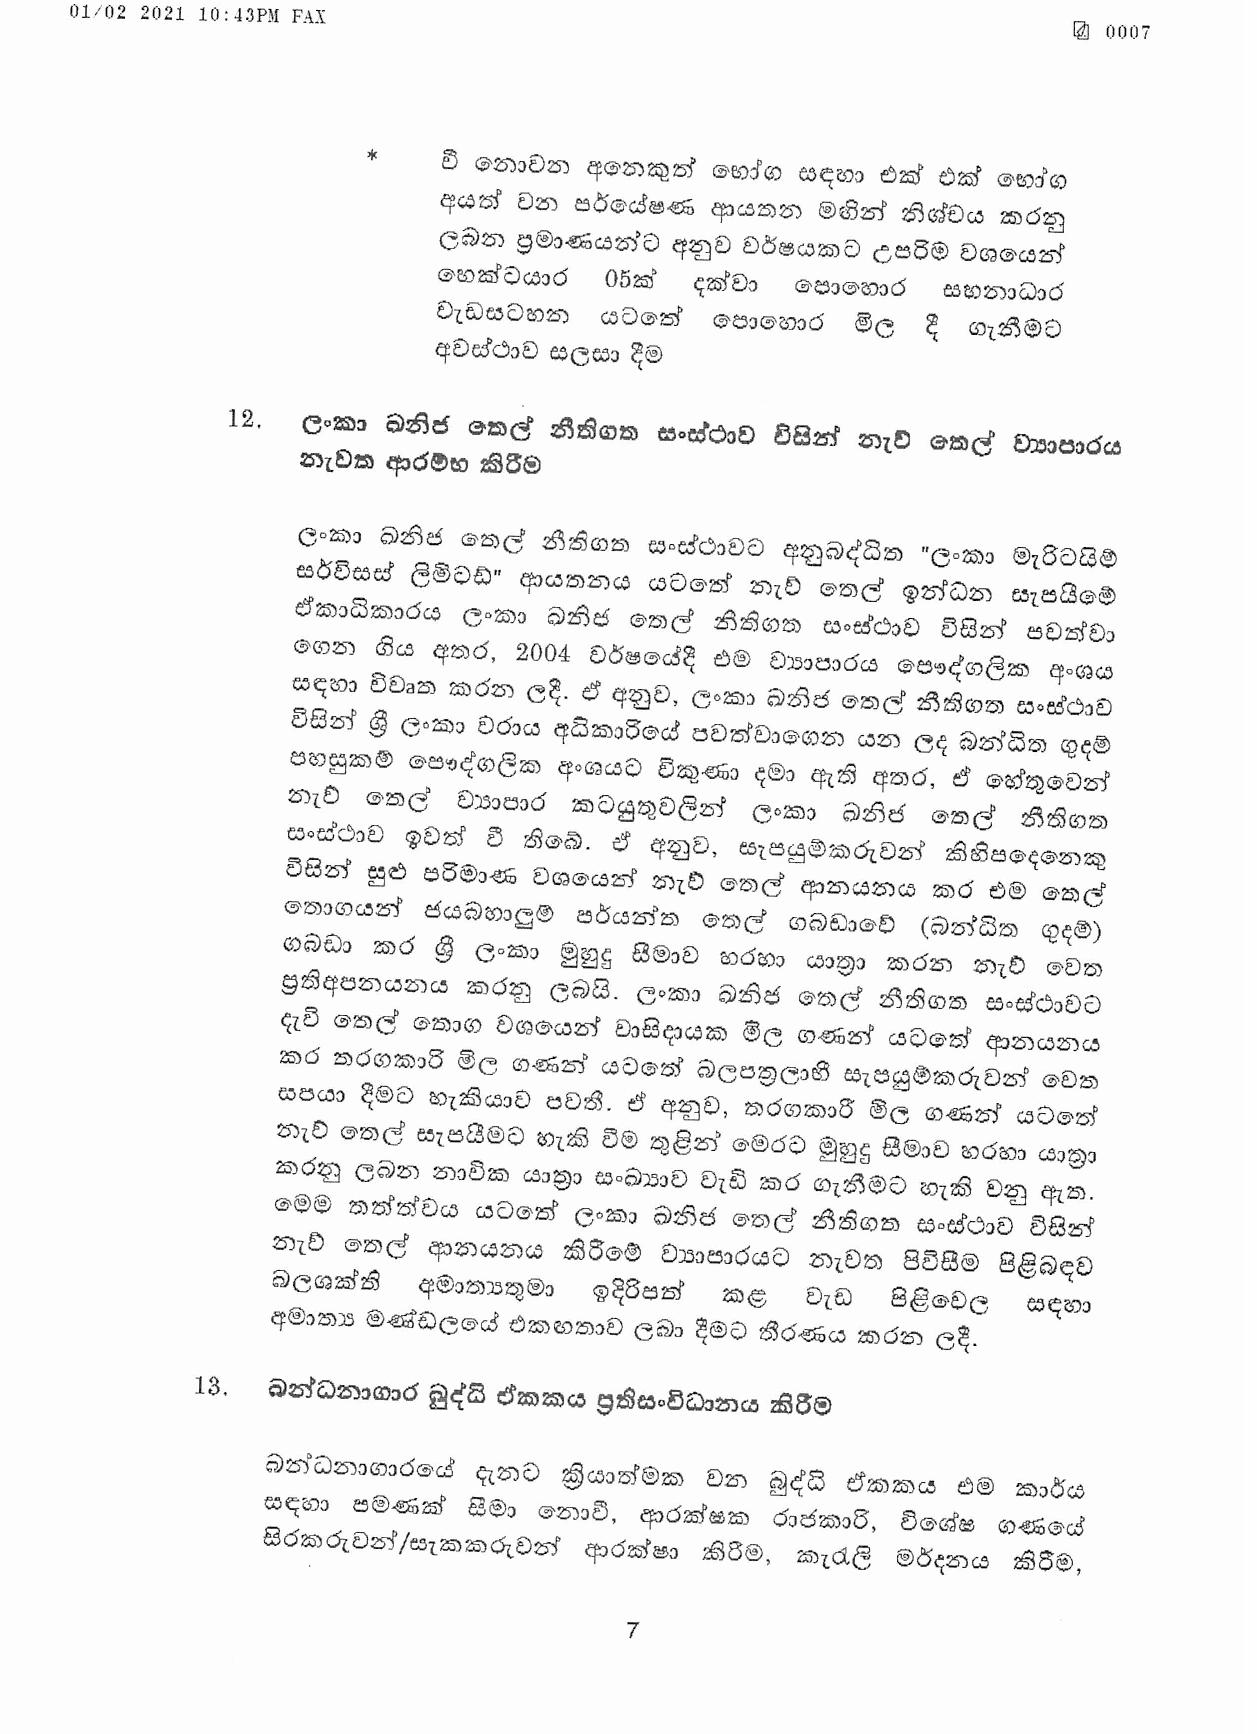 Cabinet Decision on 01.02.2021 page 007